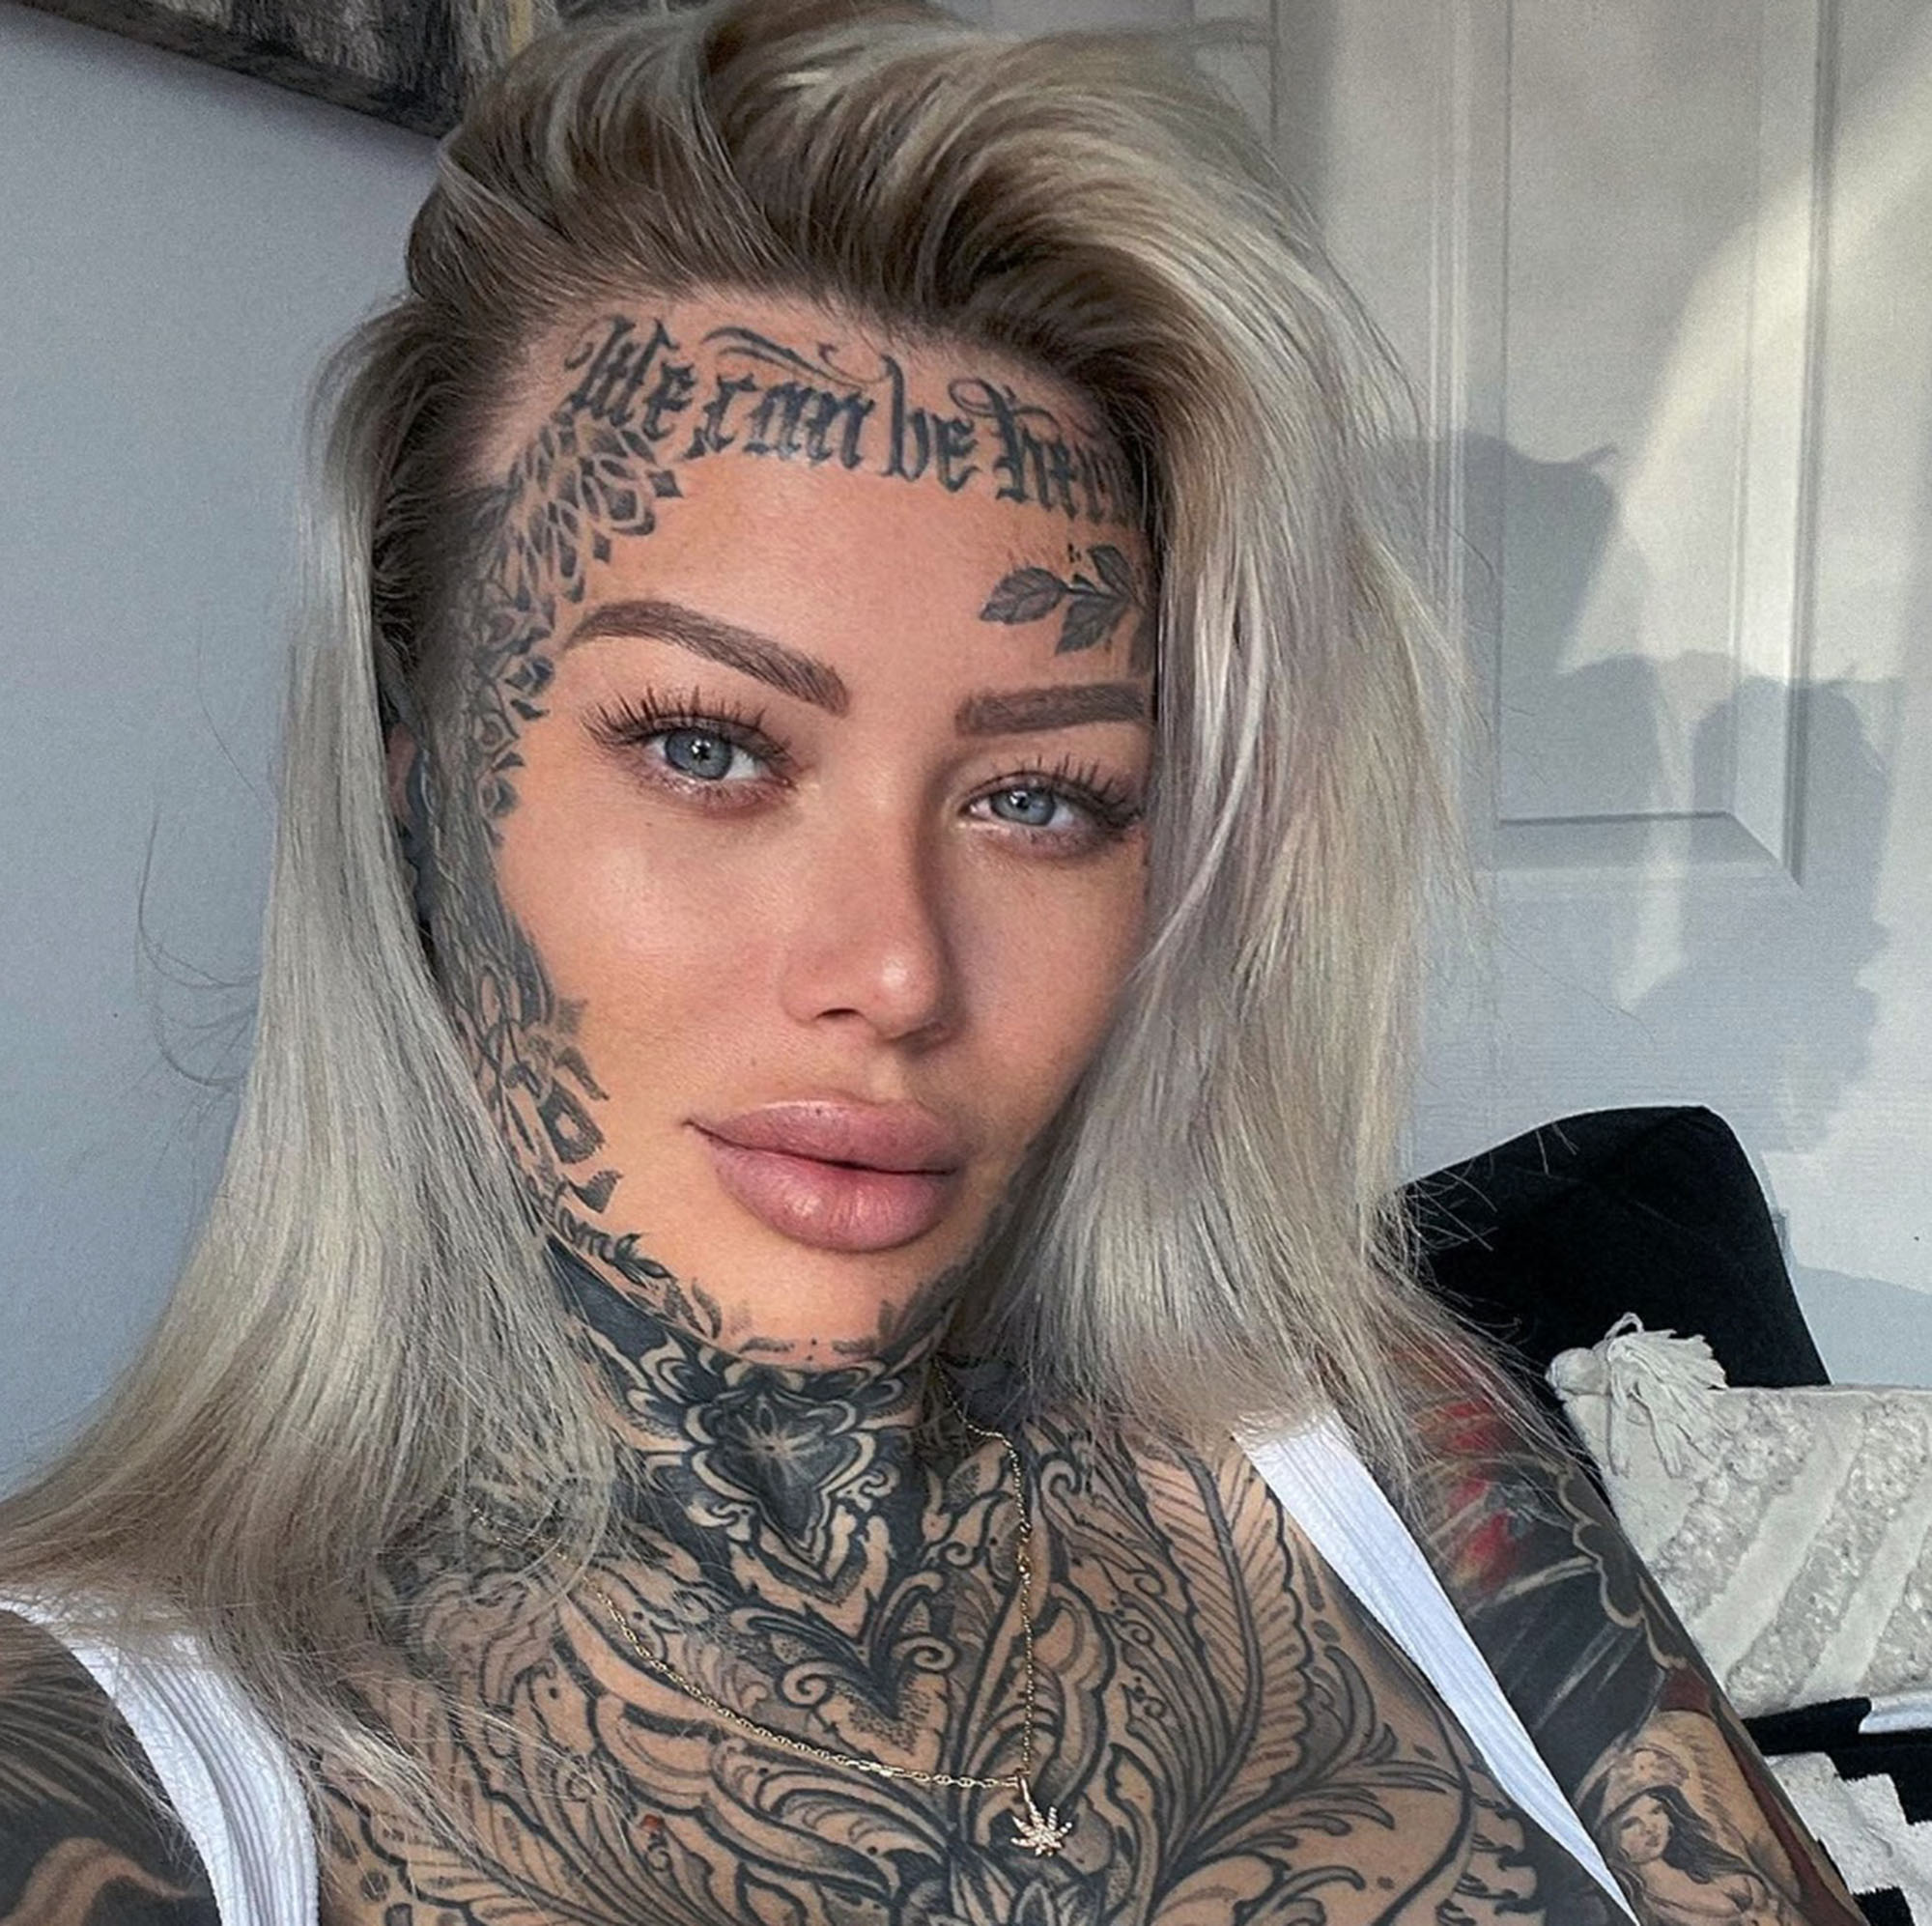 adrian connor recommends Tattoos On Girls Privates